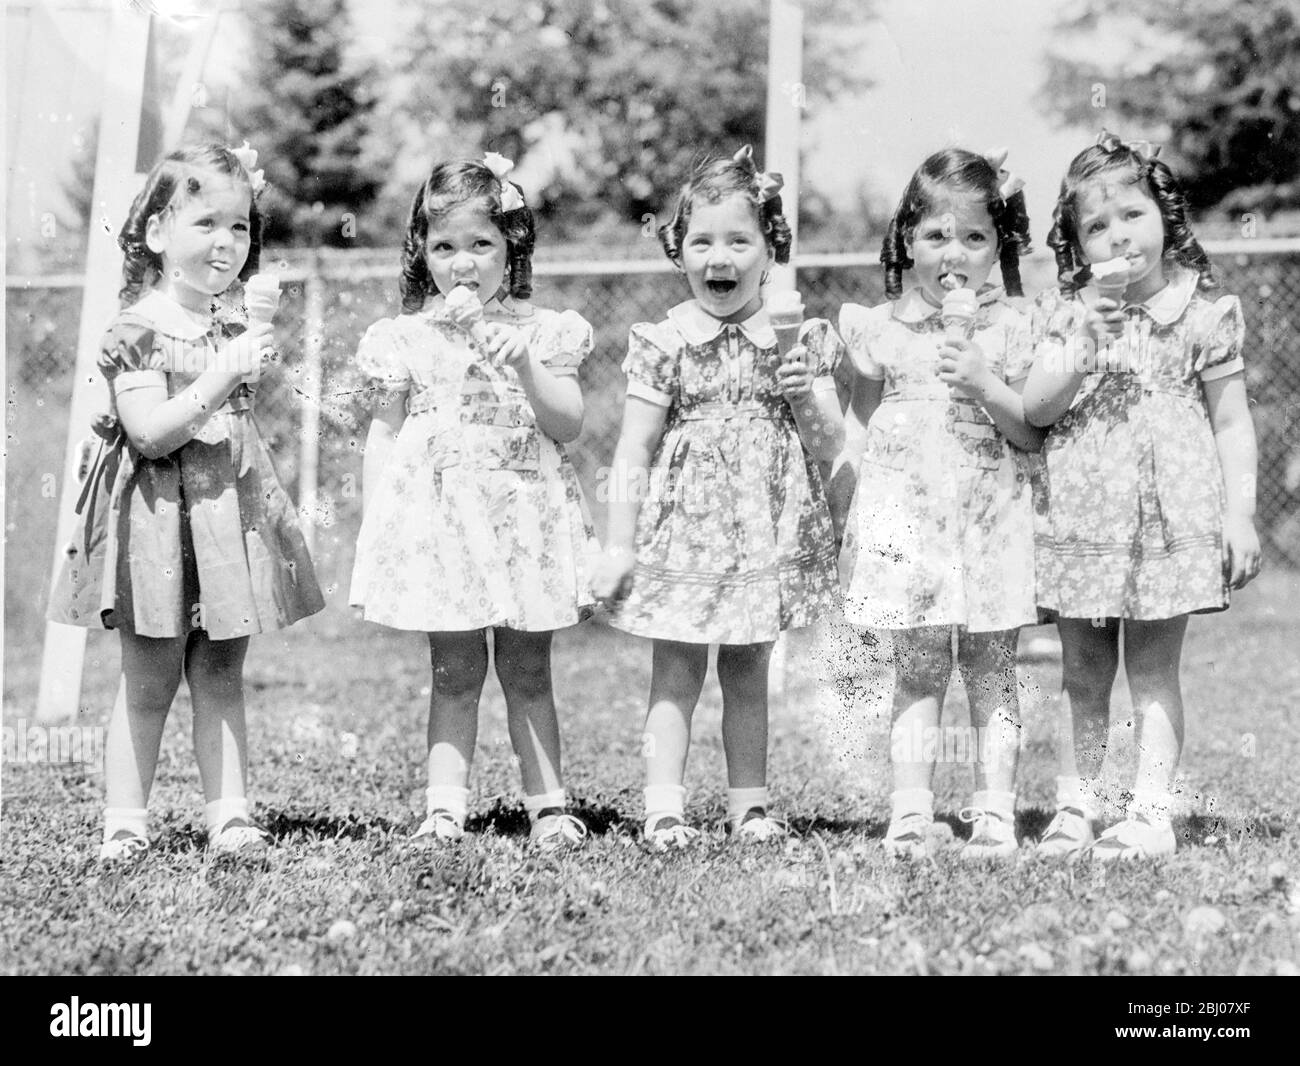 Quins are allowed ice cream now. - the Dioone quintuplets with busy tounges and smiling faces, demonstrate their liking for ice cream, a novelty for them at their Callander, Ontario, nursery. - The five girls, Emilie, Annette, Marie, Cecile and Yvonne, were allowed ice cream for the first timeat their fourth birthday. - 5 July 1938 Stock Photo